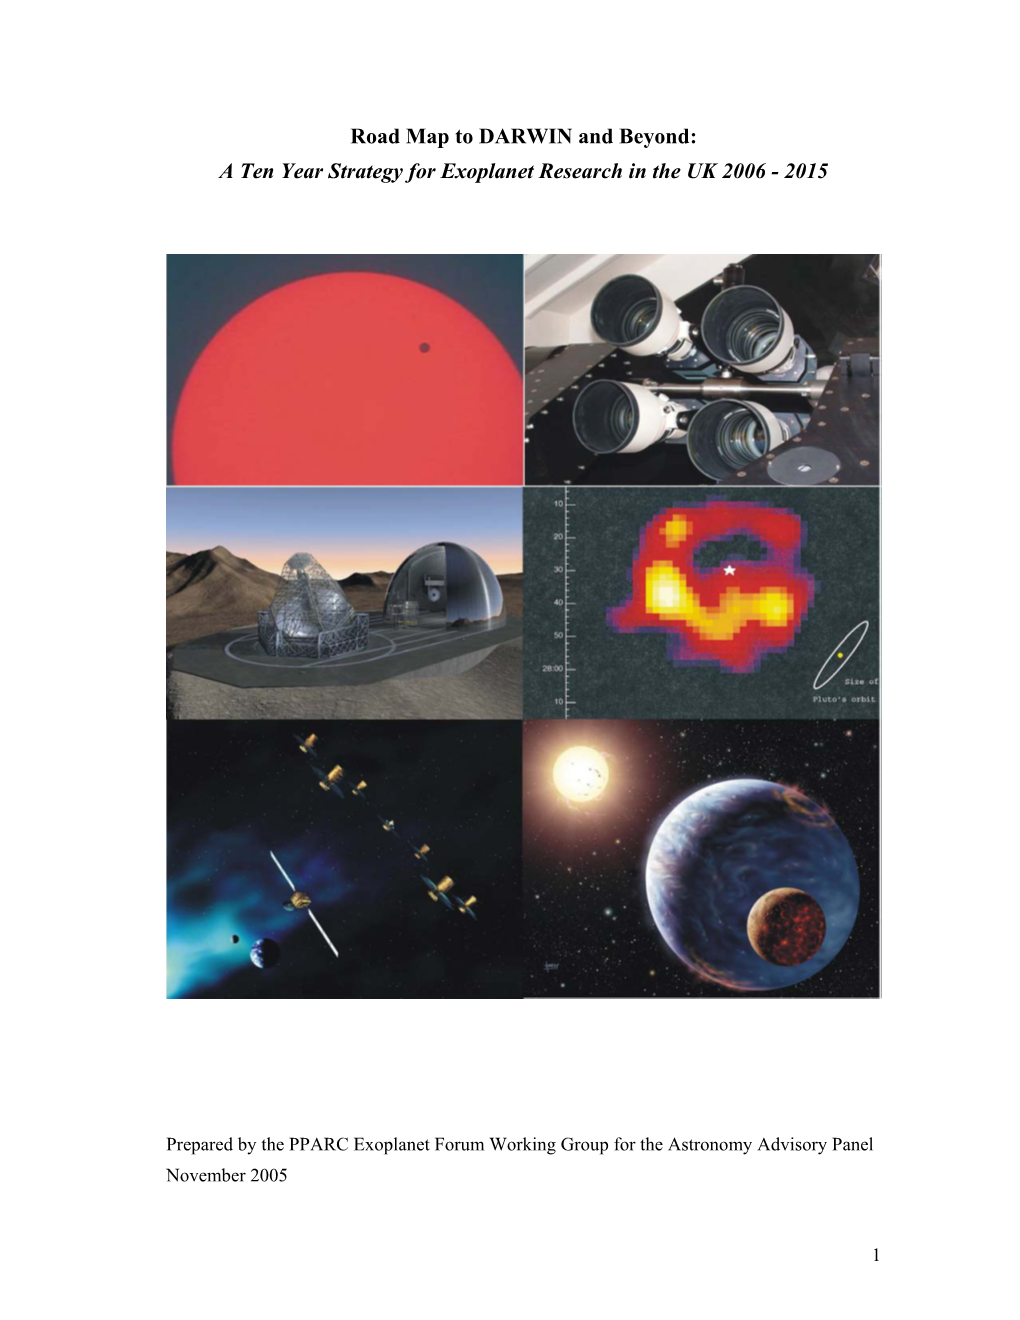 Road Map to DARWIN and Beyond: a Ten Year Strategy for Exoplanet Research in the UK 2006 - 2015